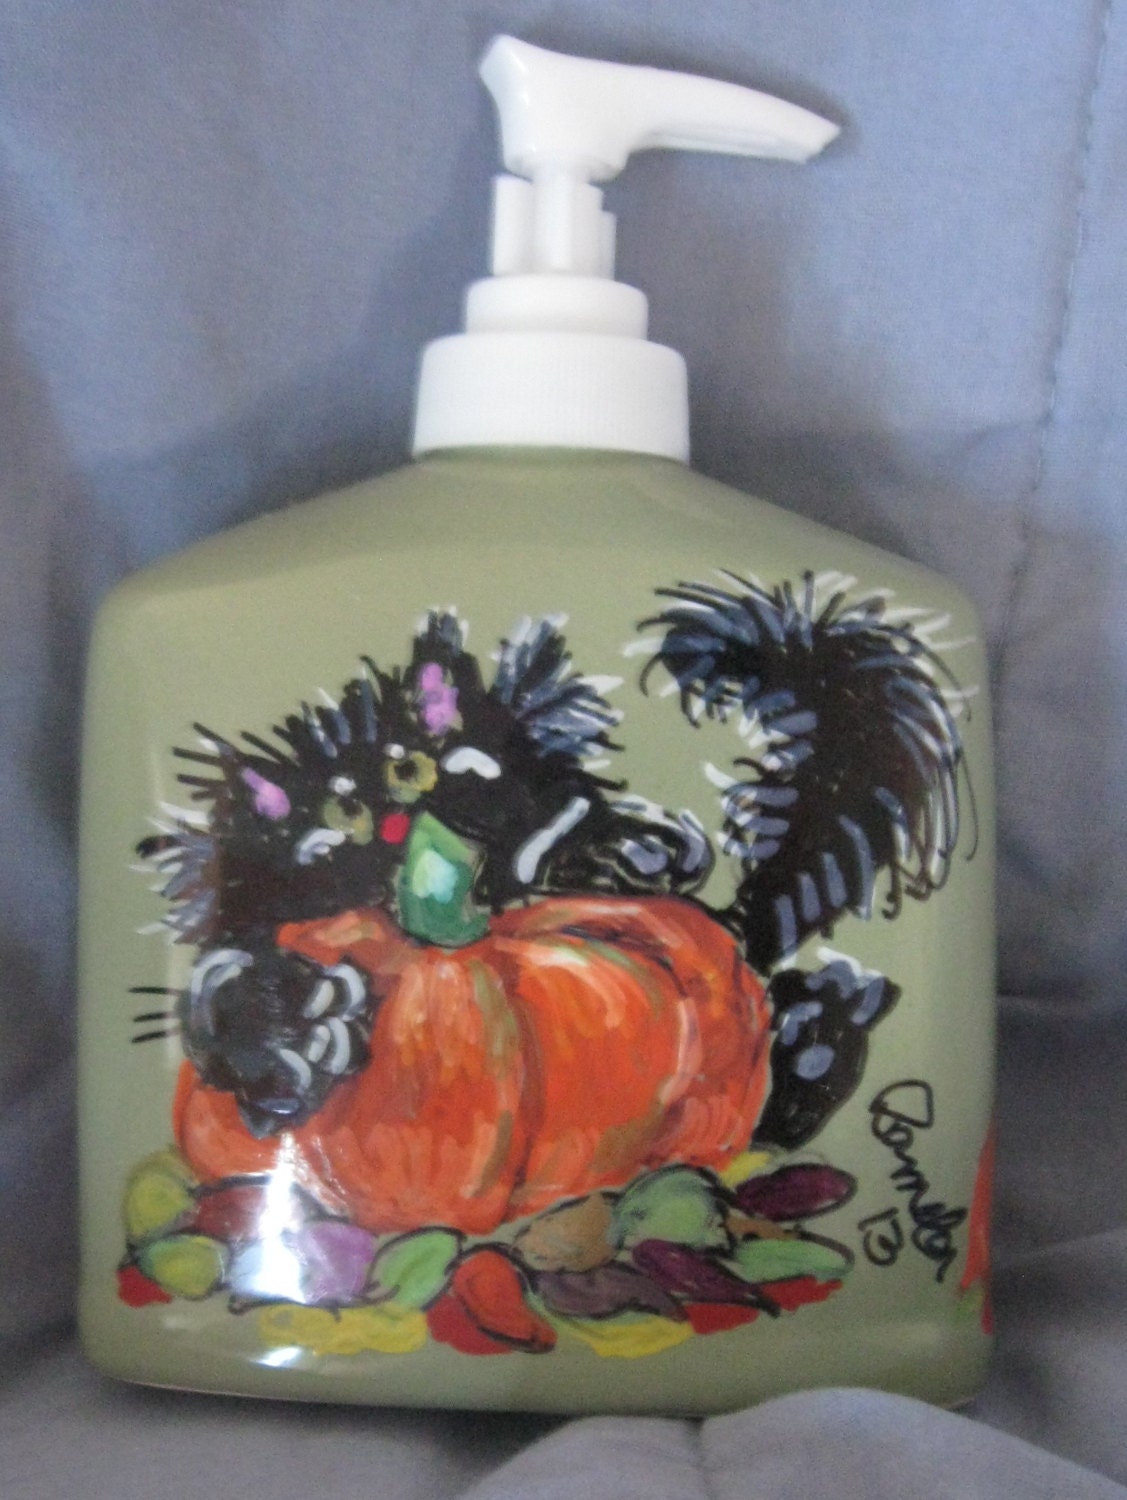 6 Inch Tall Soap dispenser for Halloween or Fall Time Hand Painted home decor, Black Cat  ready for a Booitful Halloween